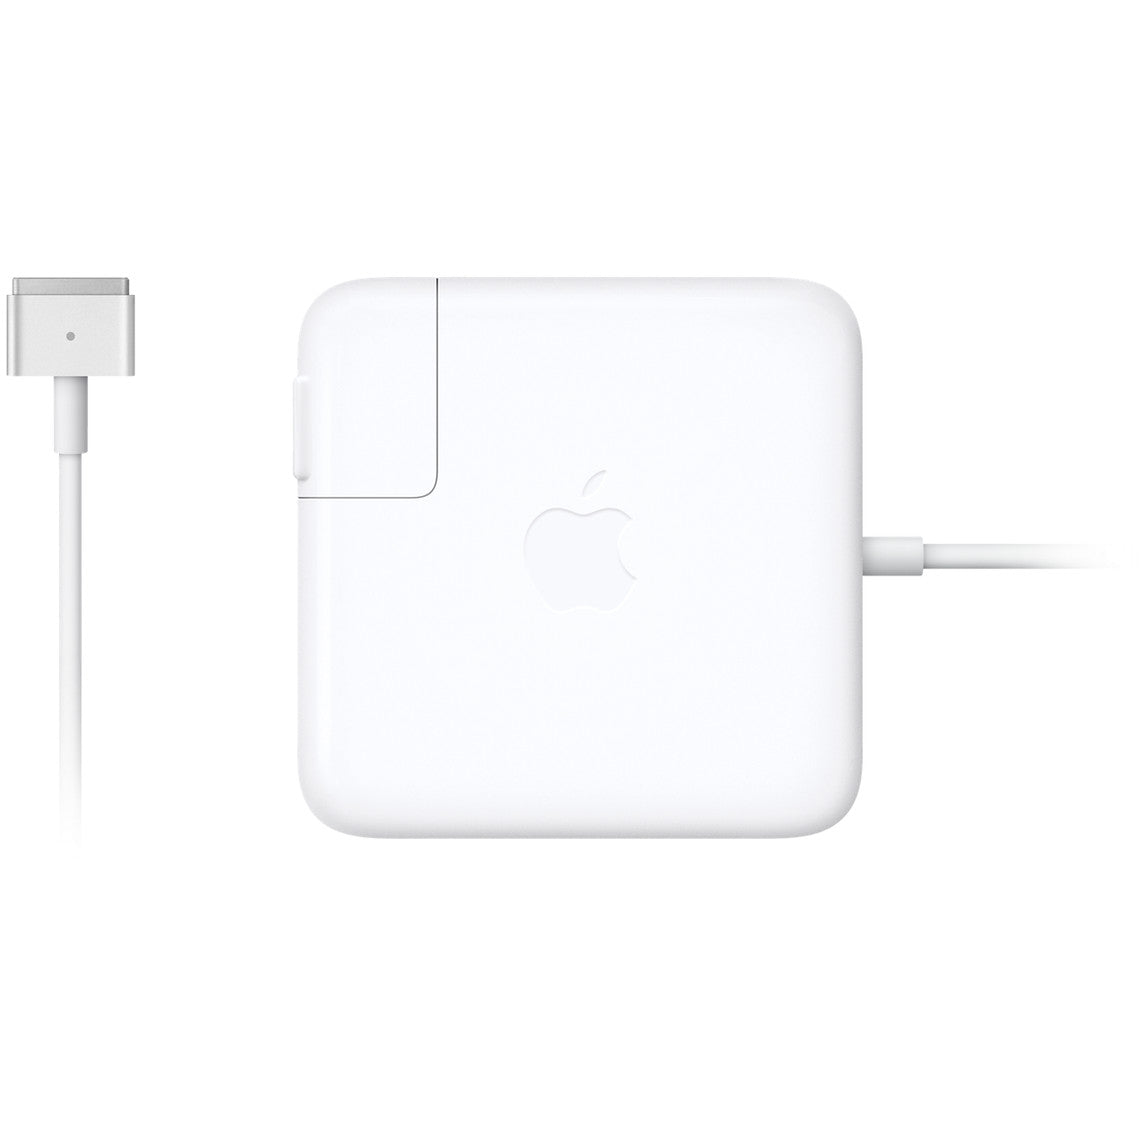 Macbook Charger MagSafe 2 85W